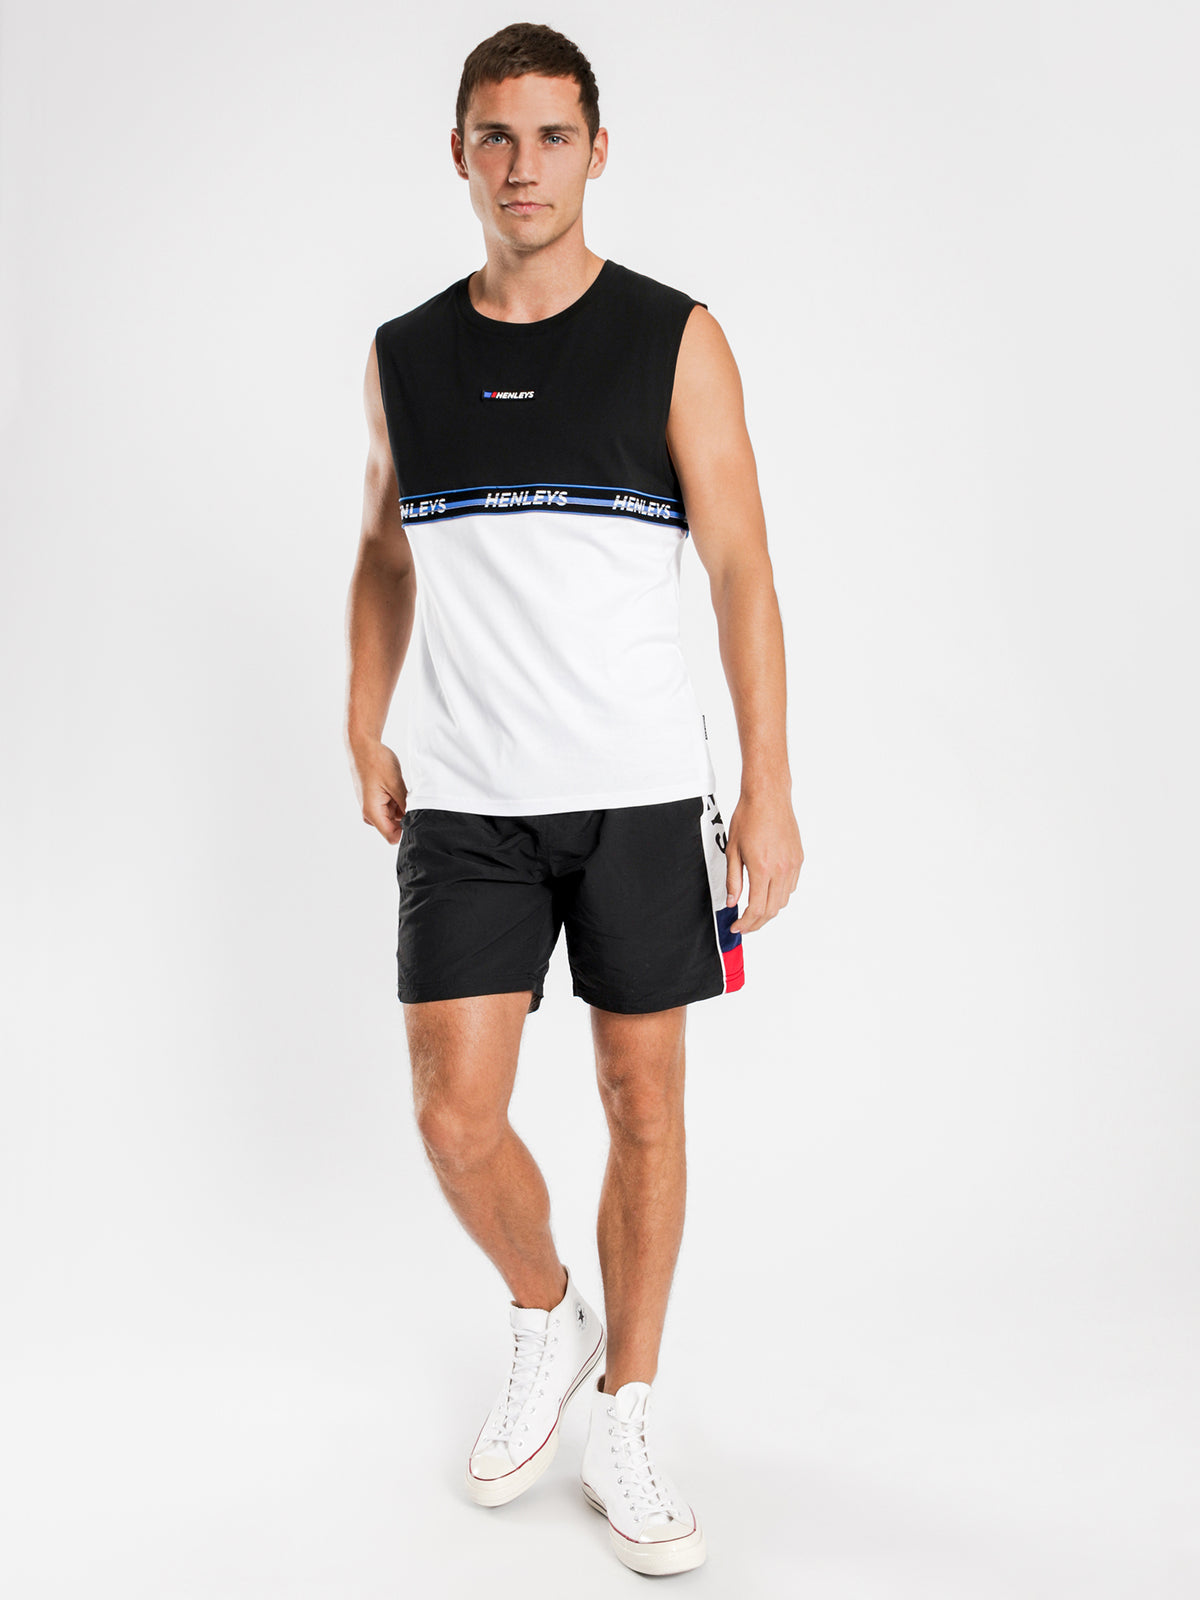 Sergio Muscle T-Shirt in Black